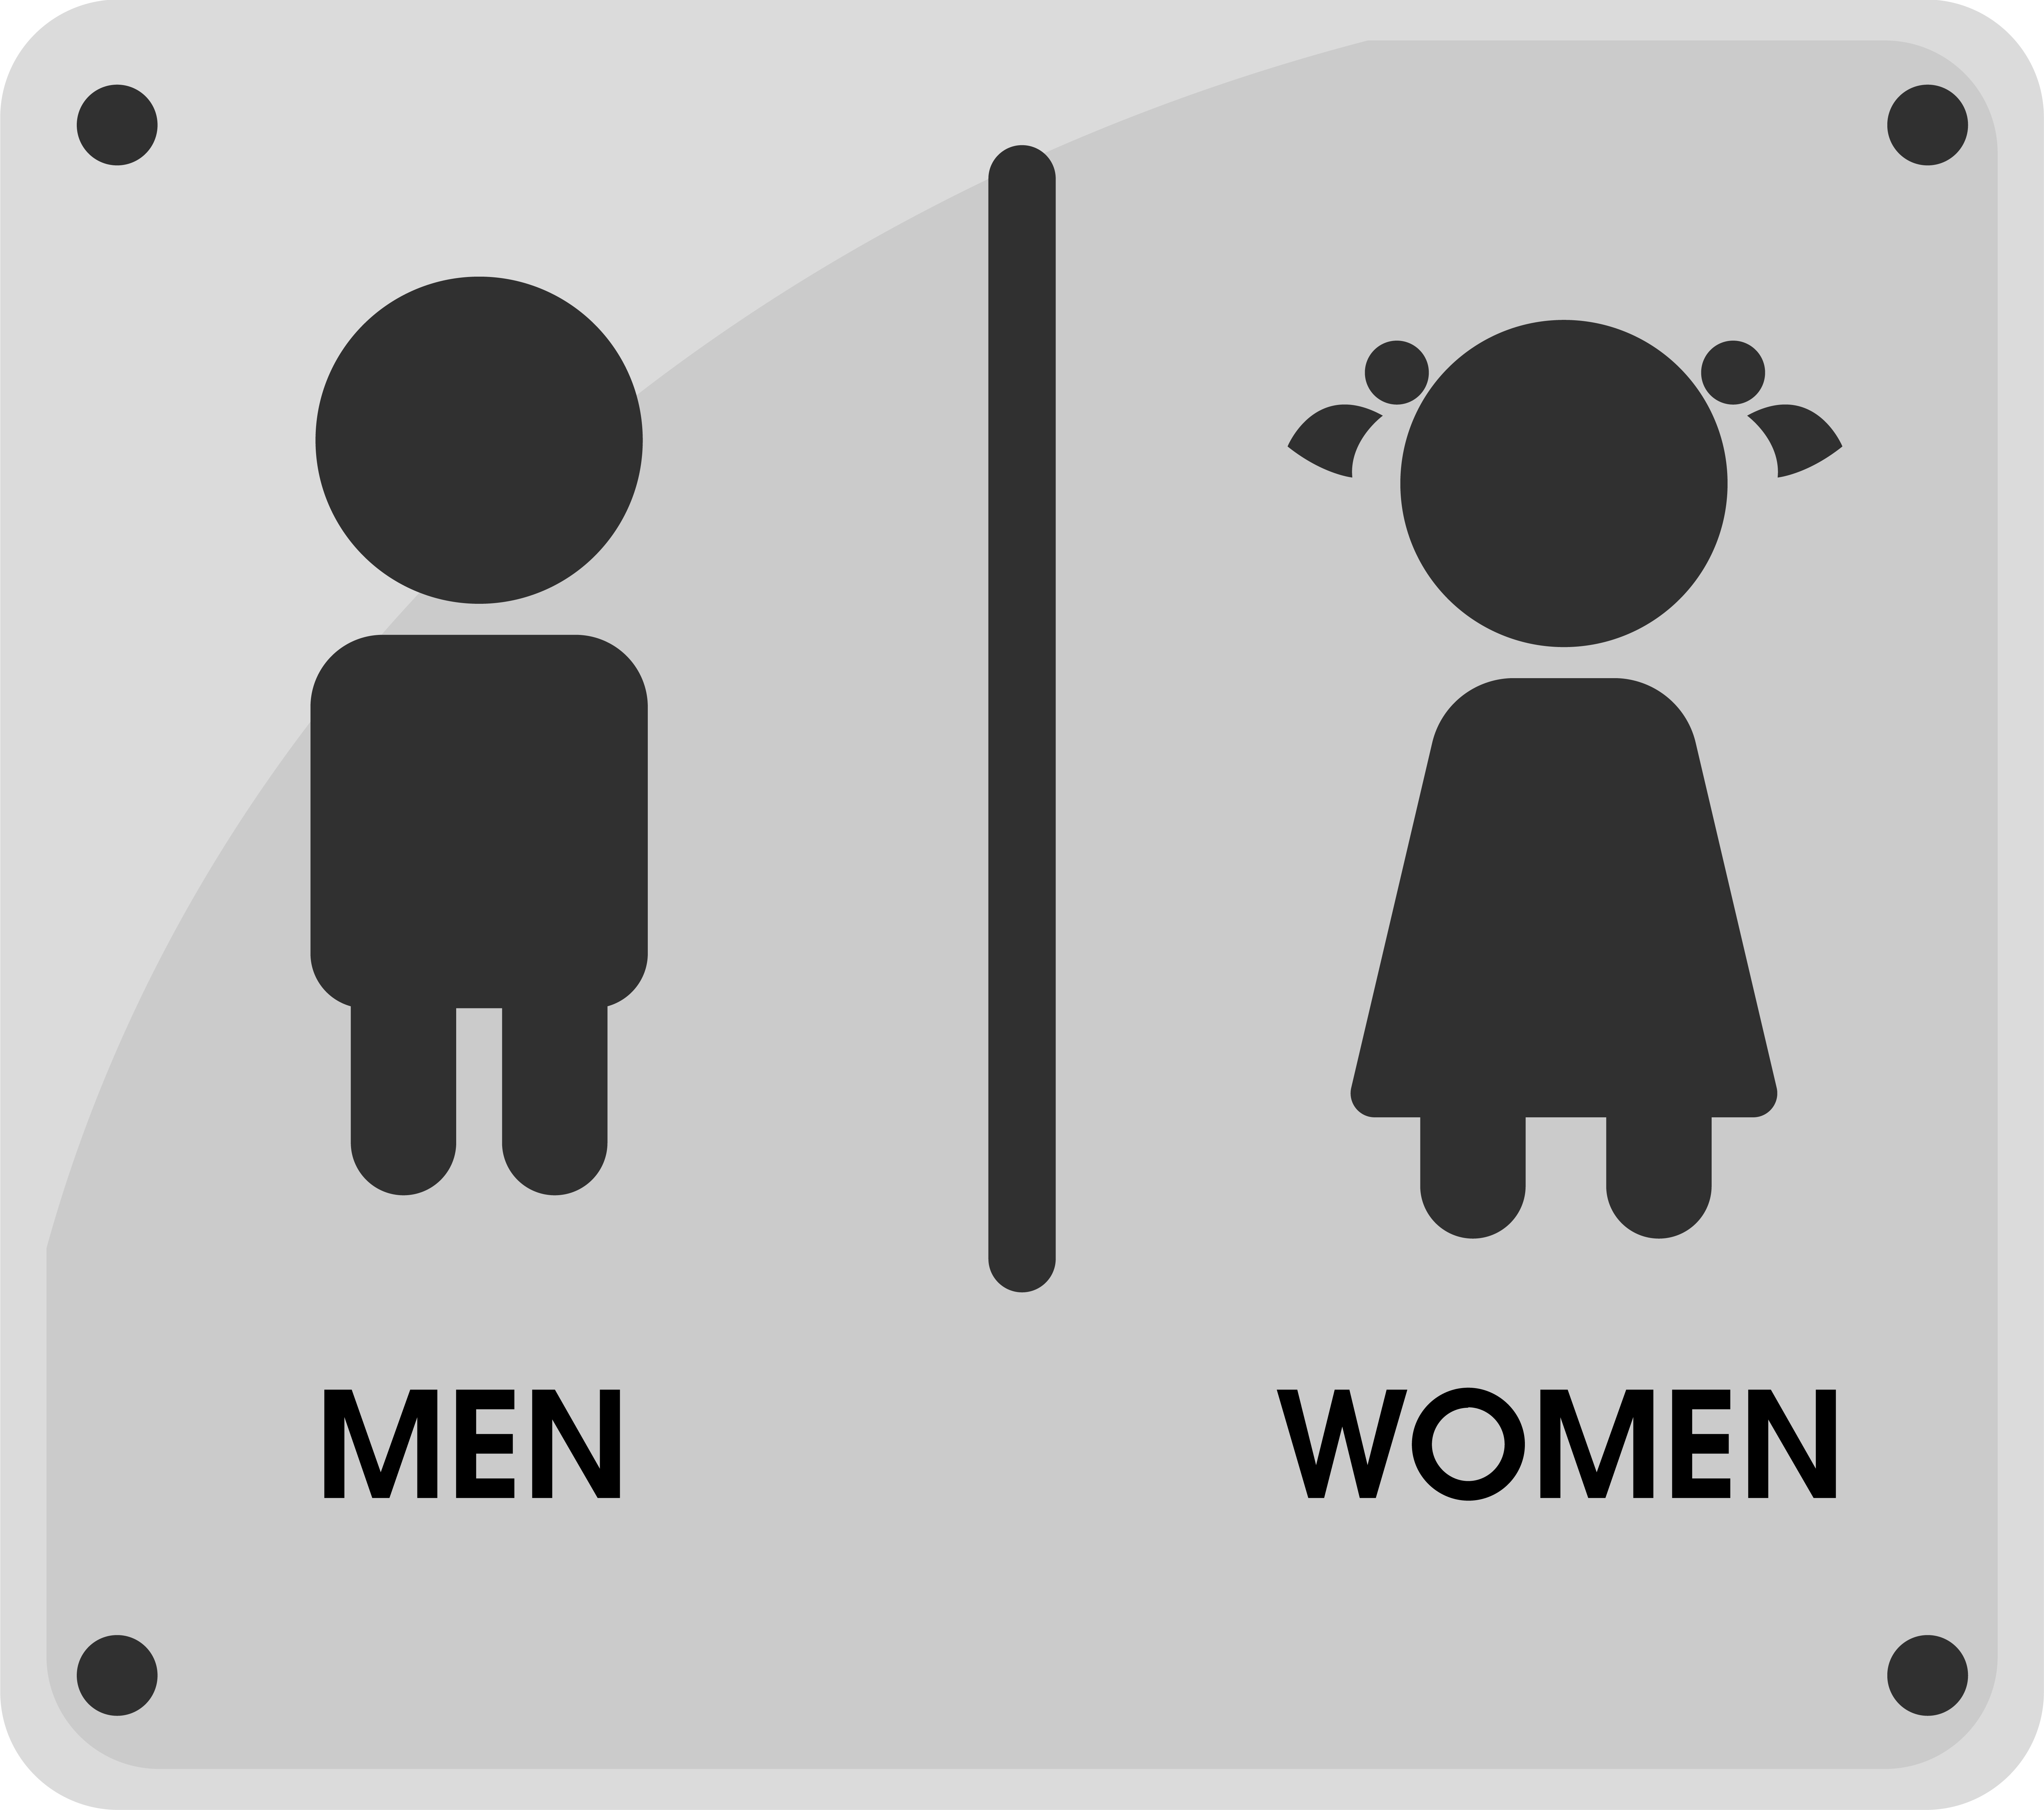 Download Men and Women Toilet icon themes That looks simple and modern. Vector Illustration. - Download ...